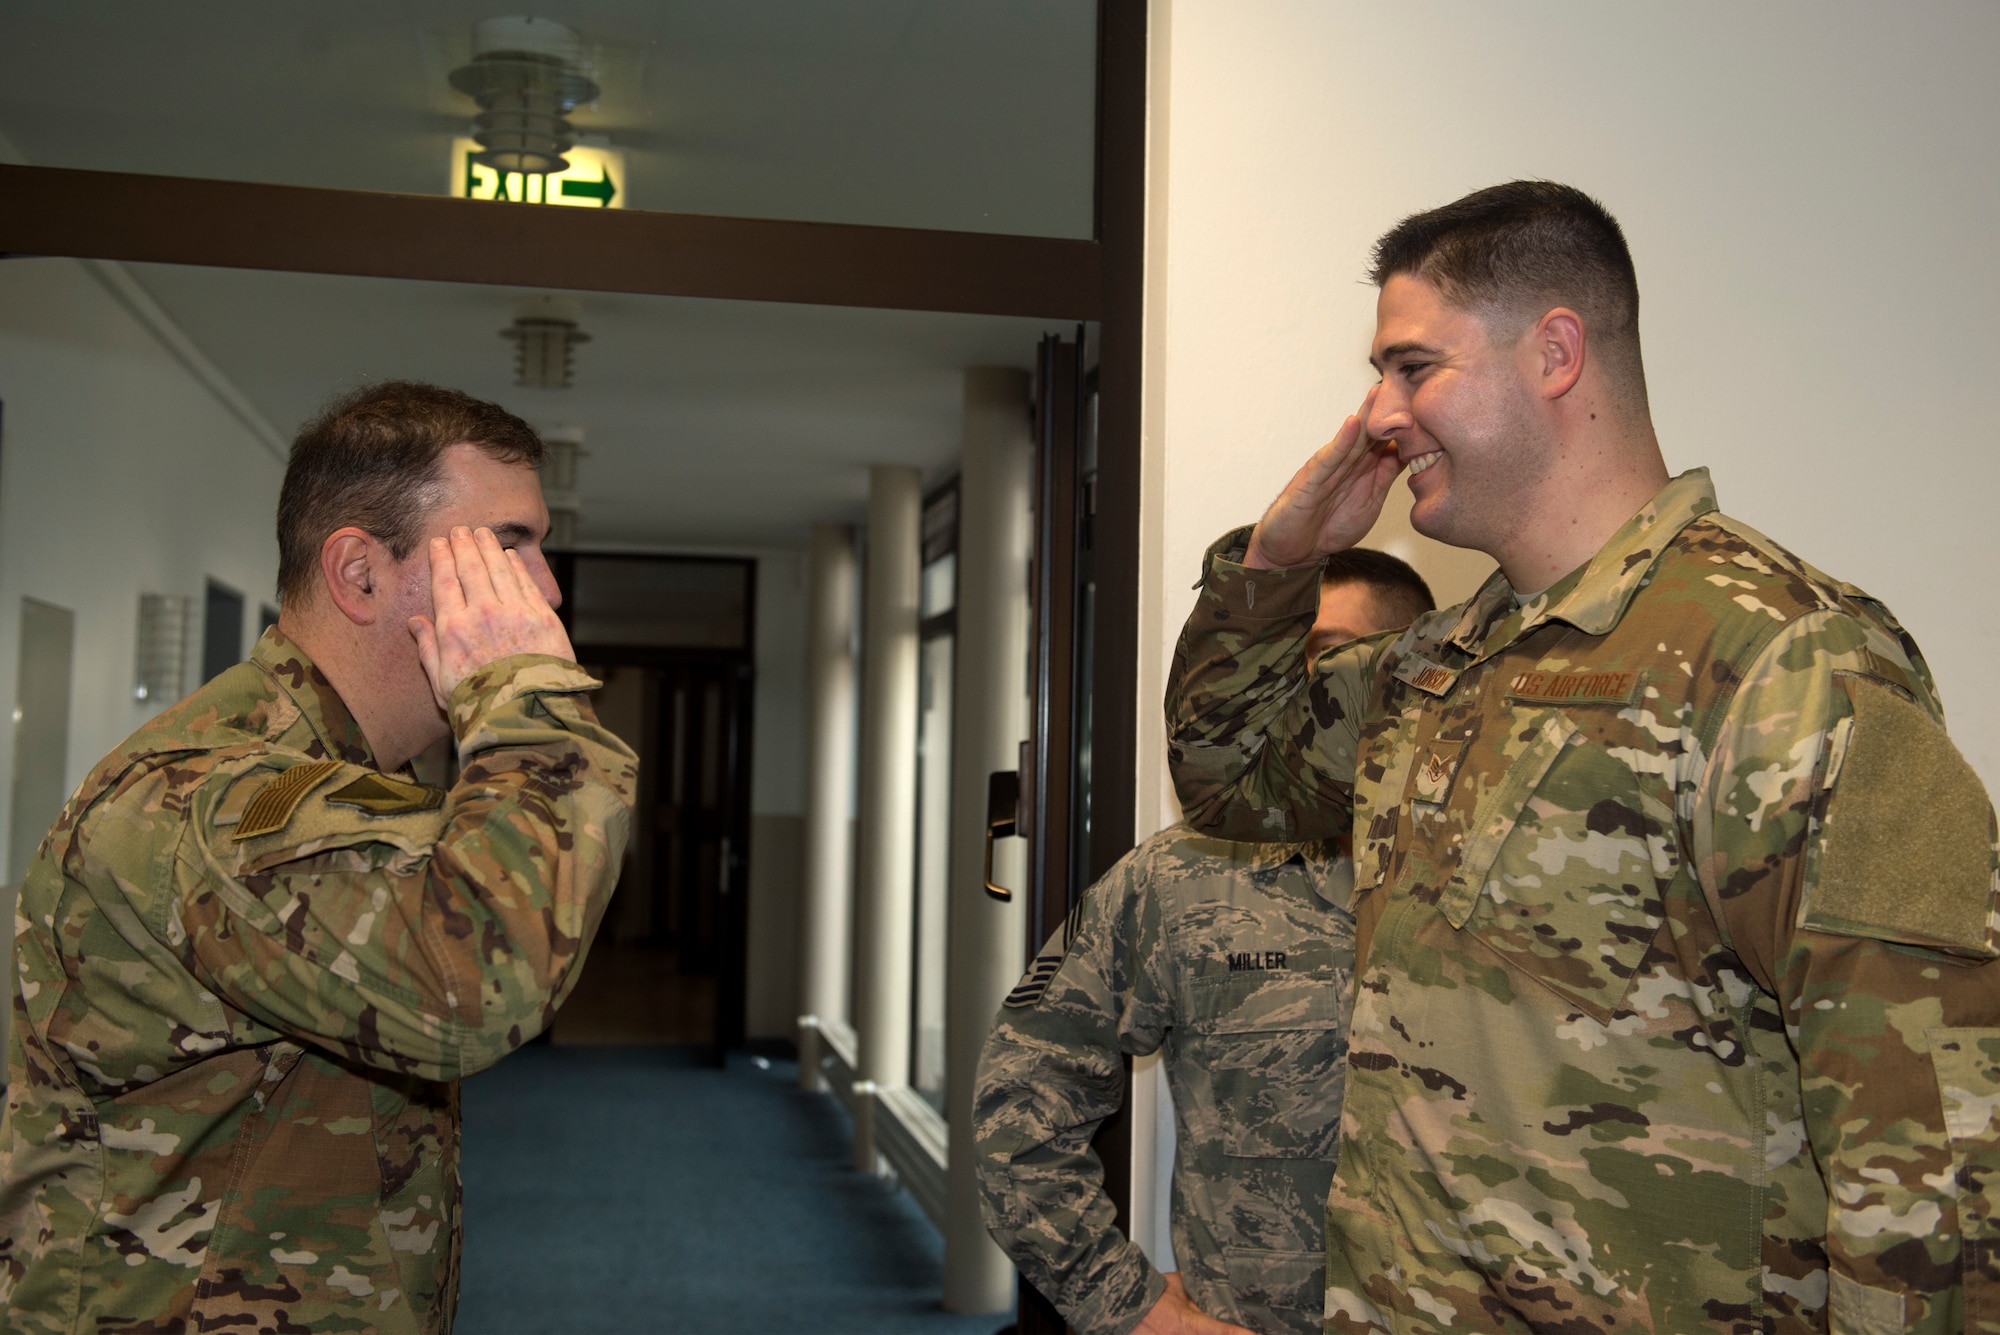 U.S. Air Force Staff Sgt. Jacob Johnson, 86th Airlift Wing non-commissioned officer in charge of education and training (right), salutes U.S. Air Force Brig. Gen. Mark R. August, 86th AW commander, after being coined by August on Ramstein Air Base, Germany, Jan. 17, 2019. Johnson is responsible for helping ensure the freedom of religion for Airmen and their families through spiritual care and counseling leadership. (U.S. Air Force photo by Staff Sgt. Jonathan Bass)